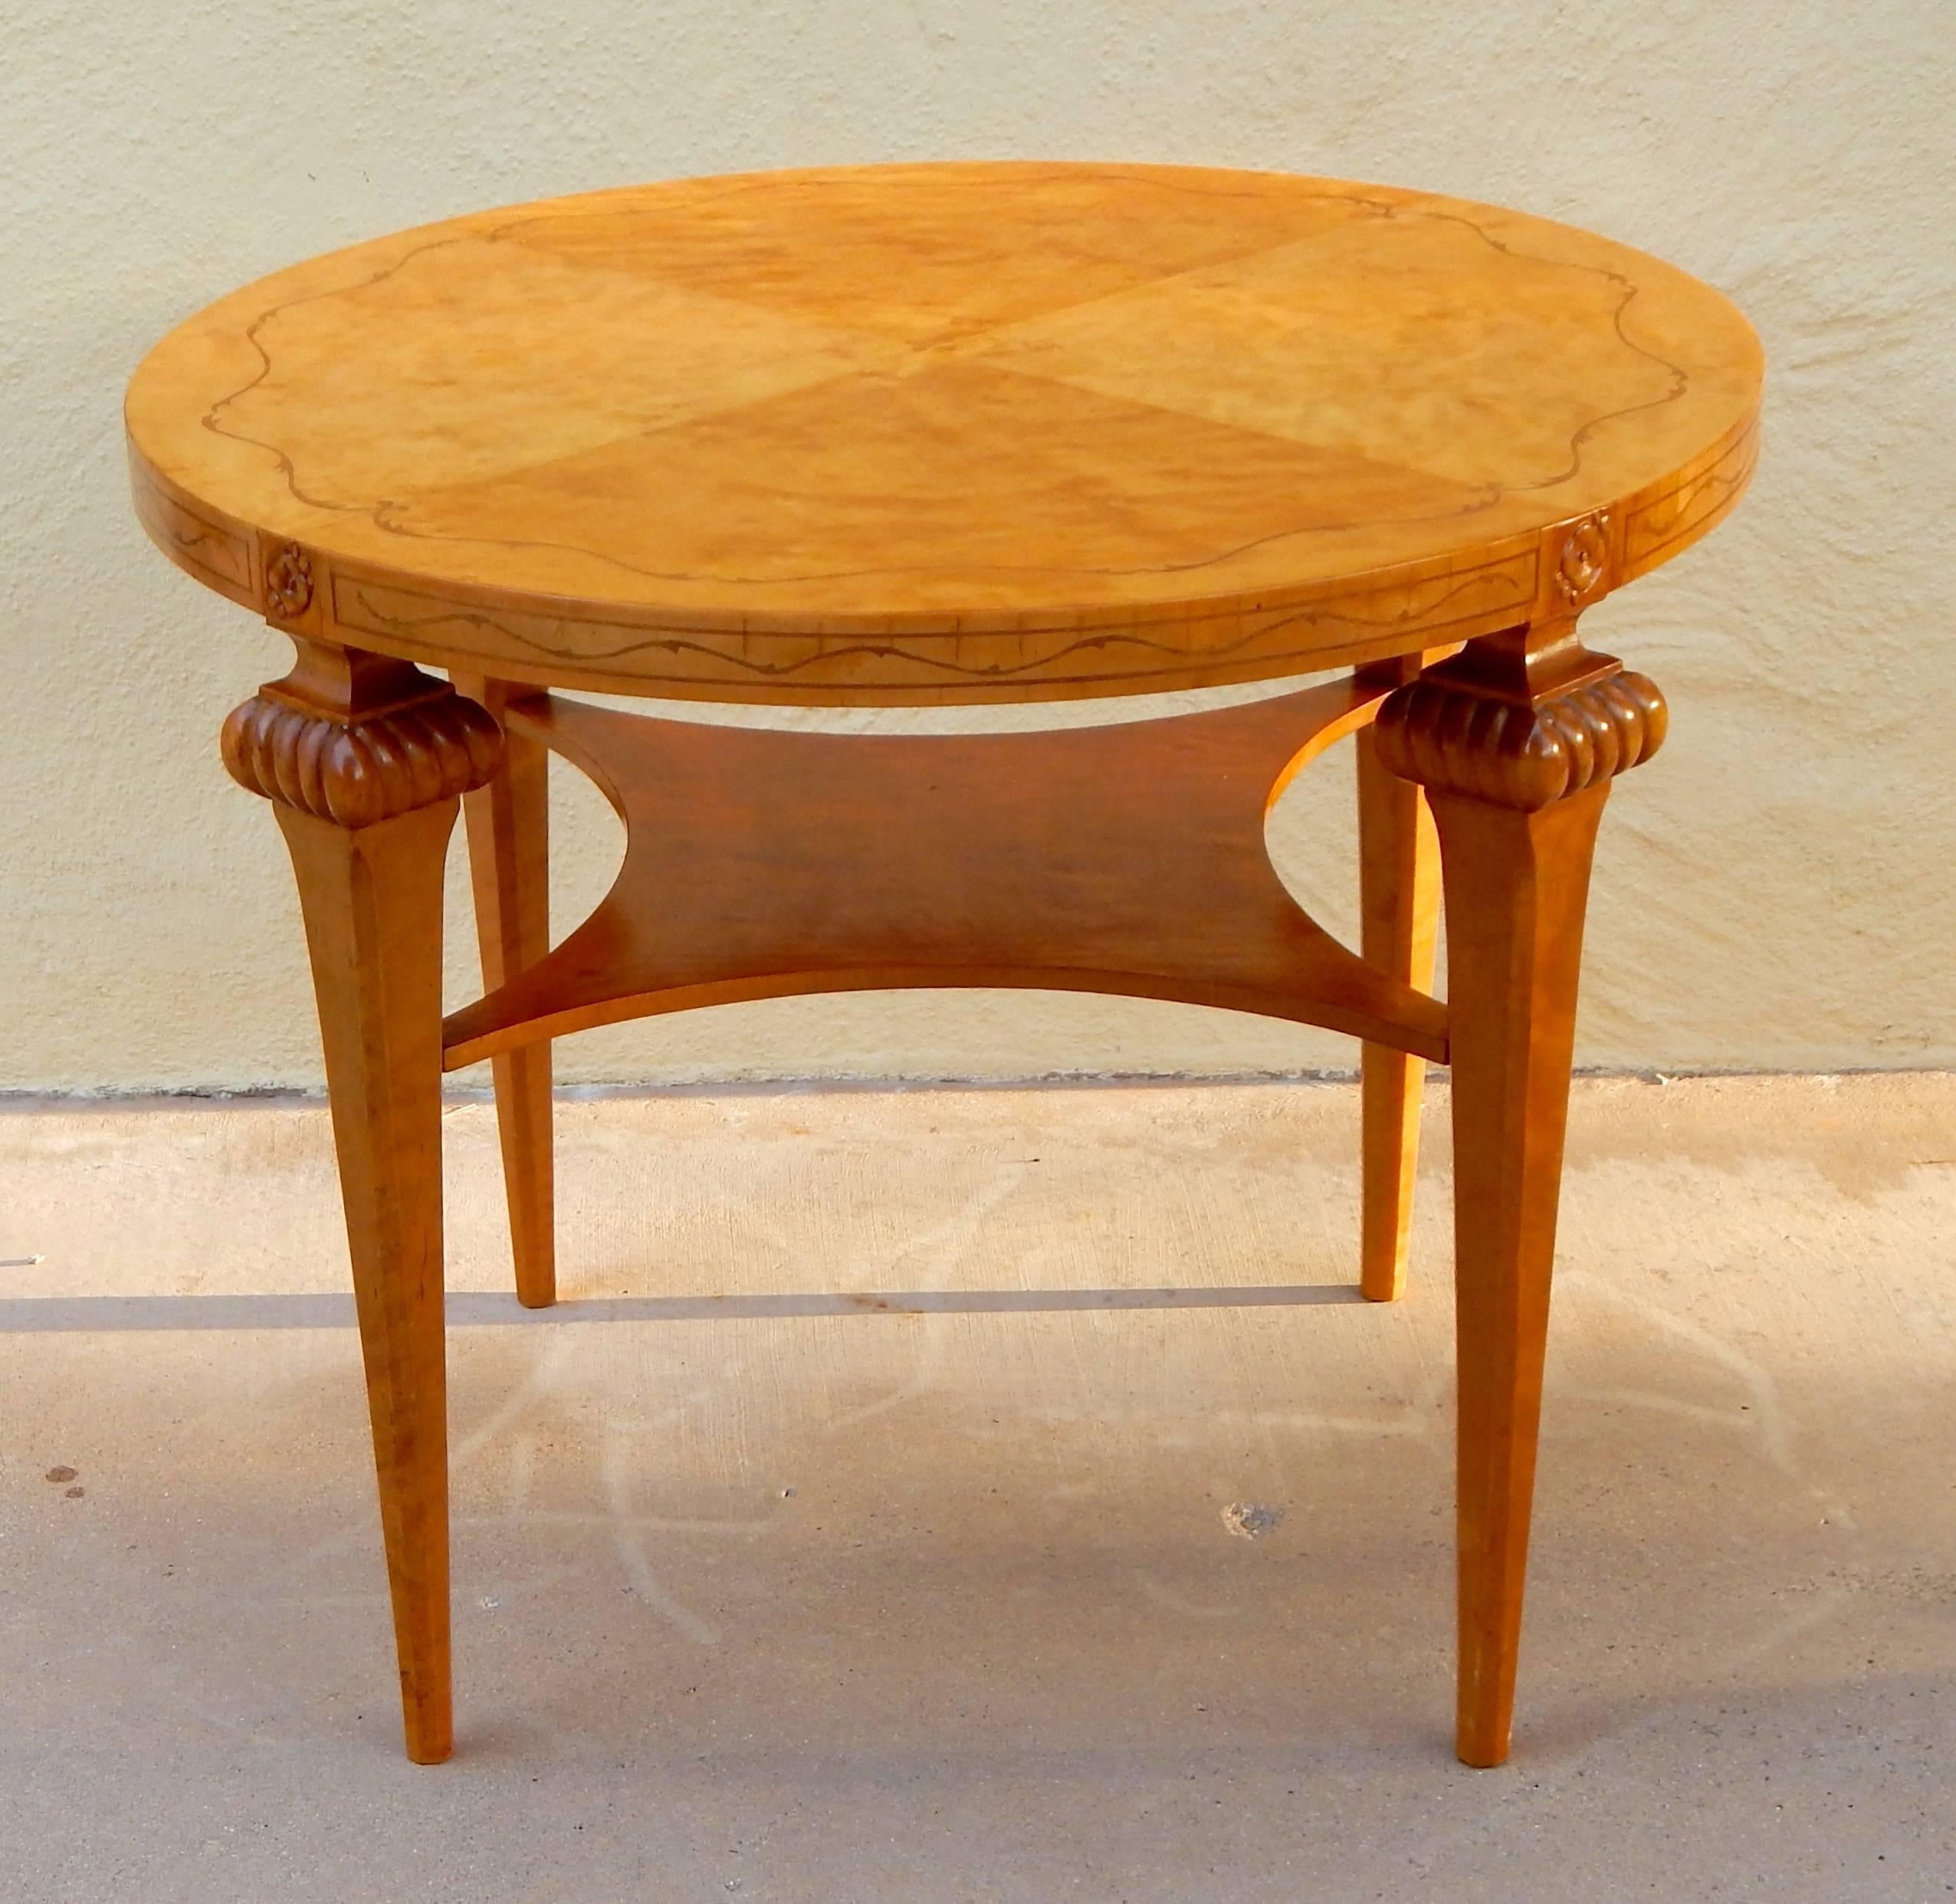 Swedish Art Deco era coffee, side, center or occasional table rendered in highly figured golden flame birch wood. In excellent condition with some minor, age appropriate ware to original finish. Contact us with any questions.